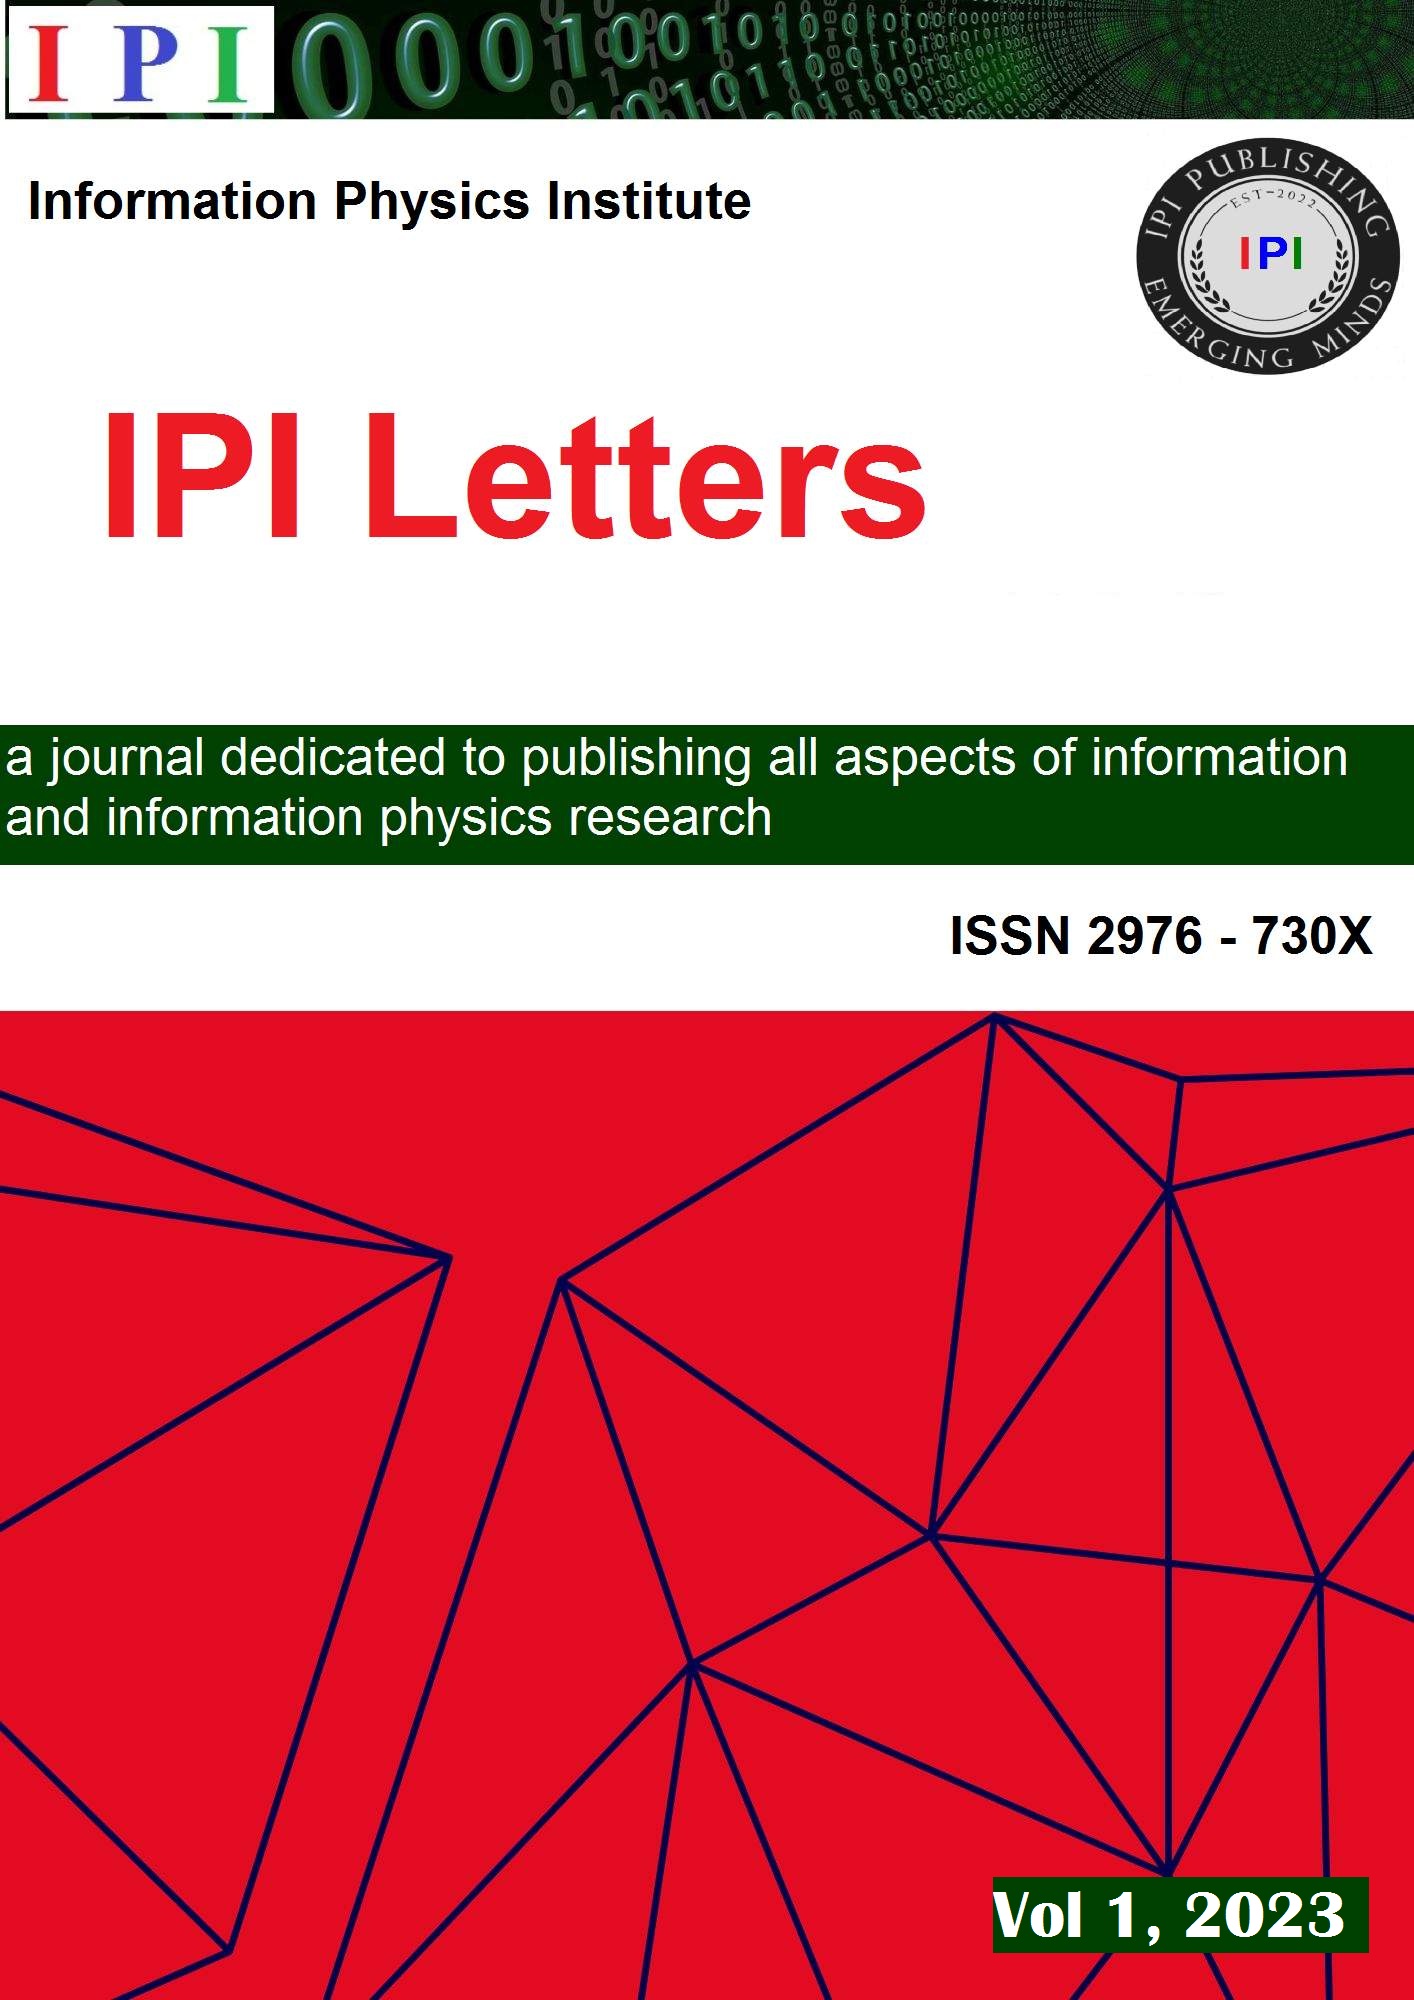 					View IPI Letters, Vol. 1 (2023)
				